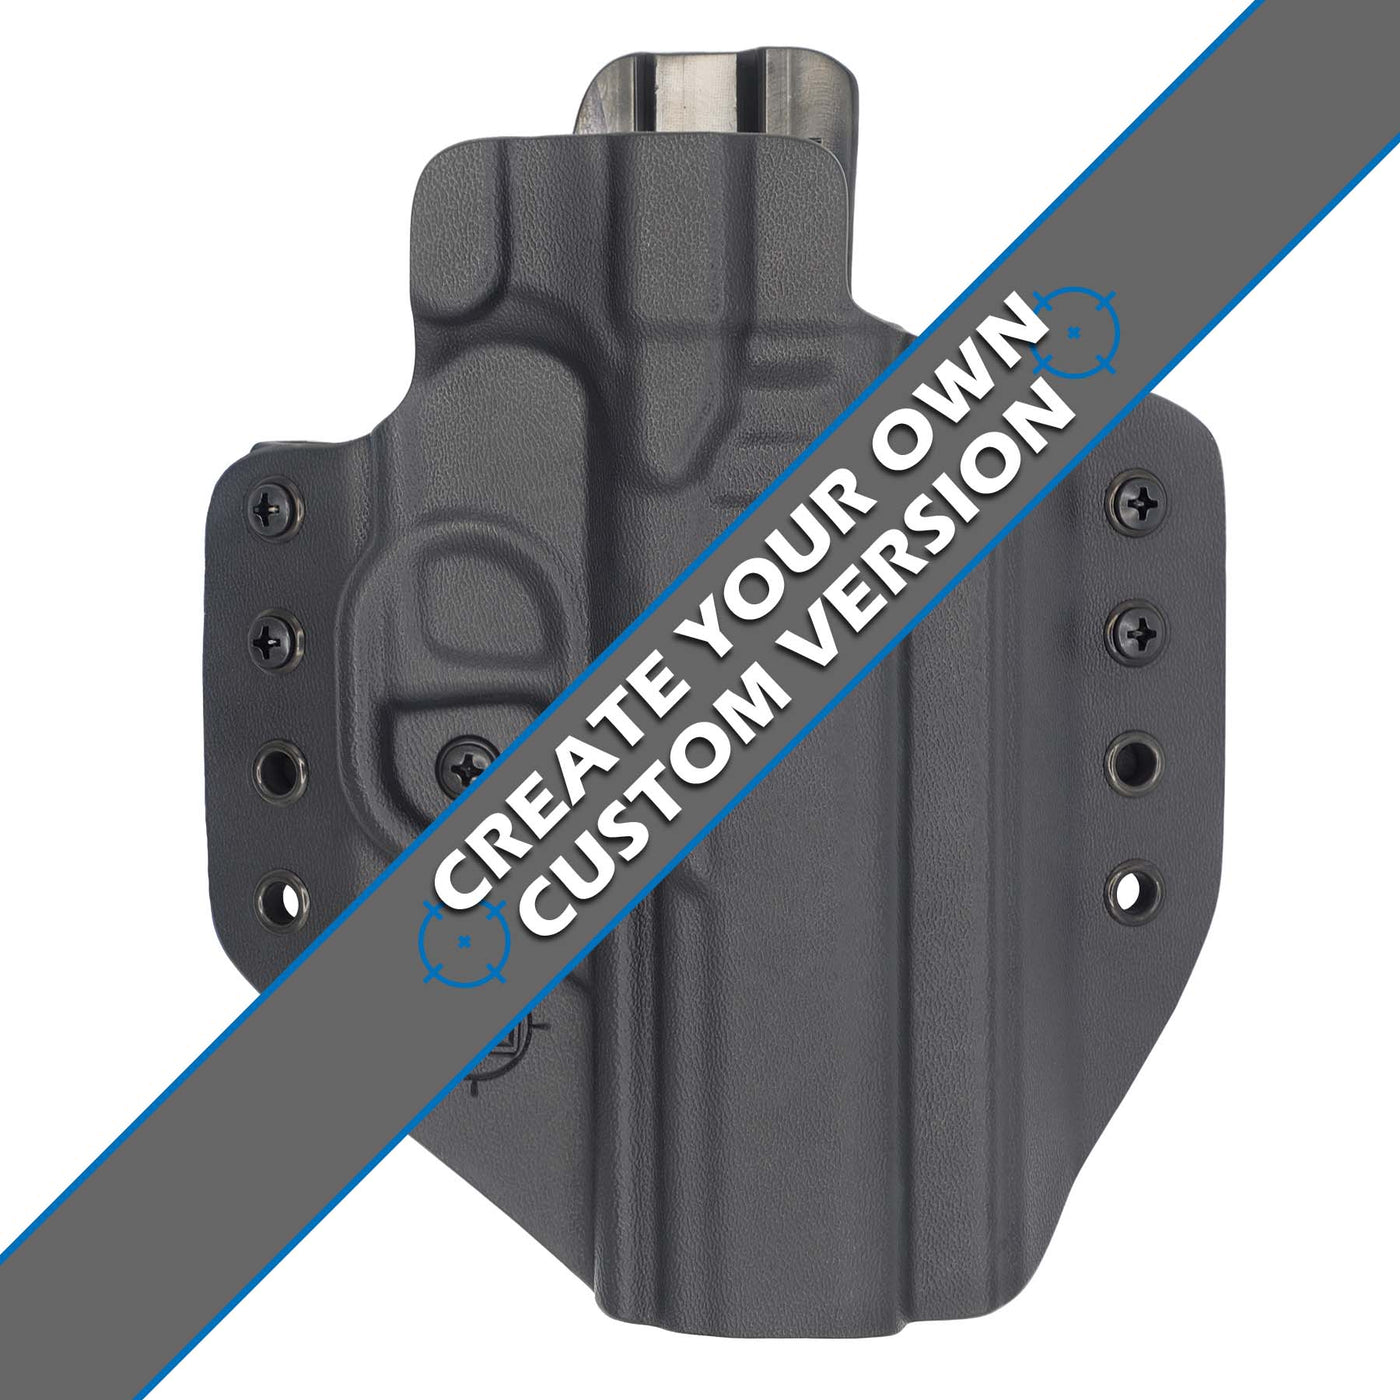 Custom Walther PDP 5 inch OWB holster by C&G Holsters